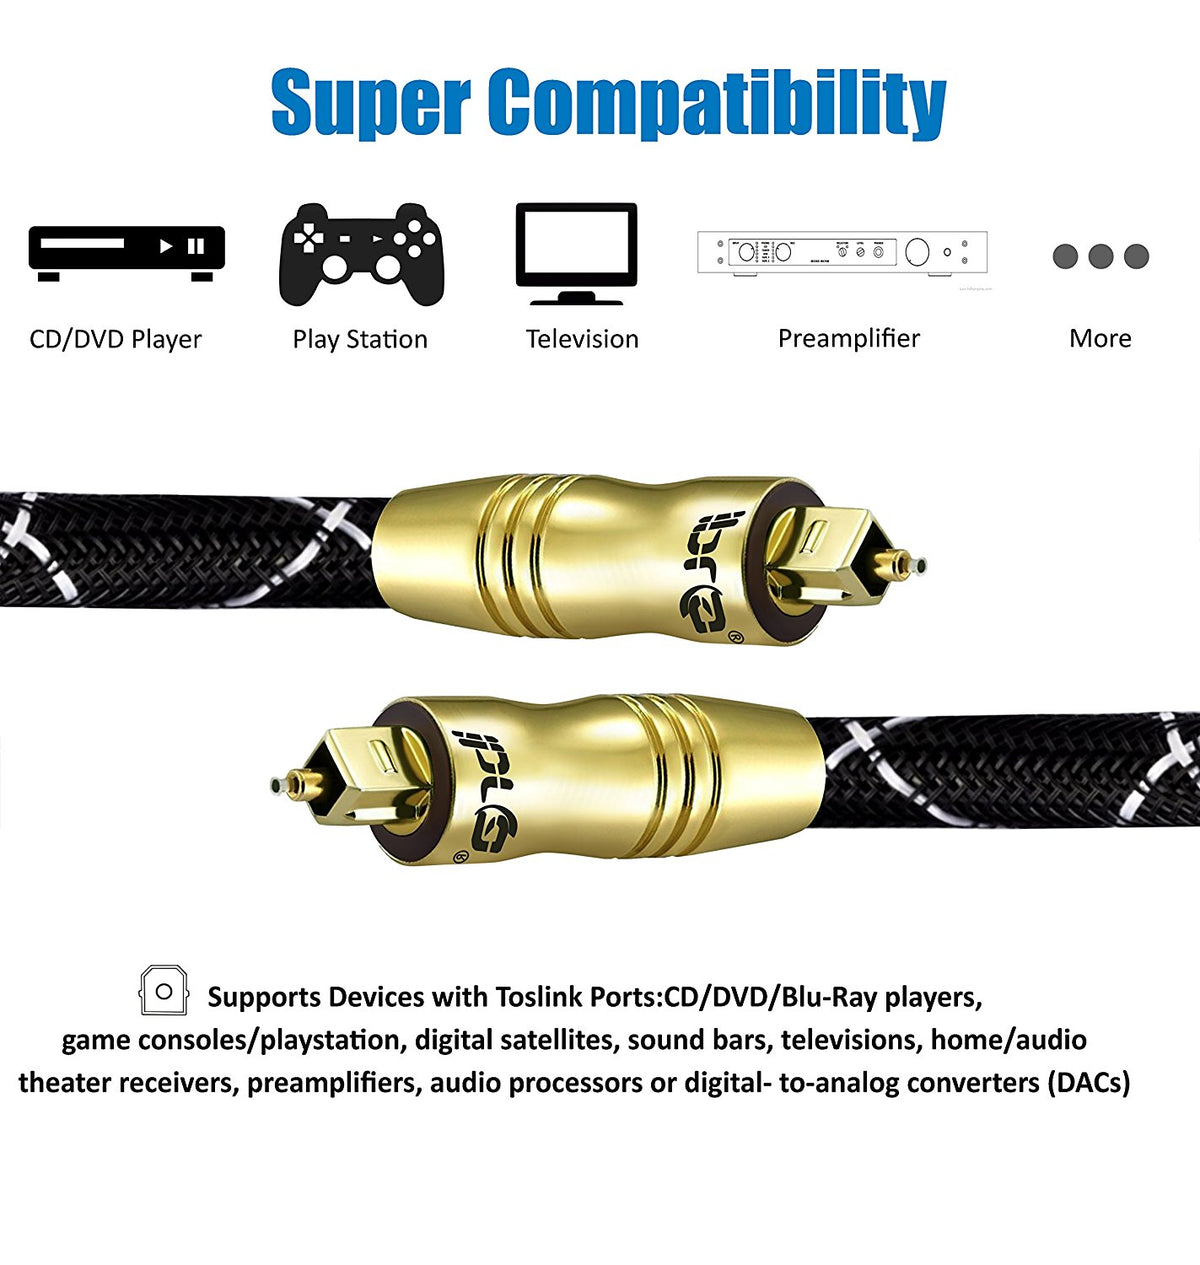 IBRA Black Master 1.5M - Optical TOSLINK Digital Audio Cable - Fiber Optic Cable - 24K Gold Casing - Compatible with PS3,Sky HD, HDtvs, Blu-rays, AV Amps